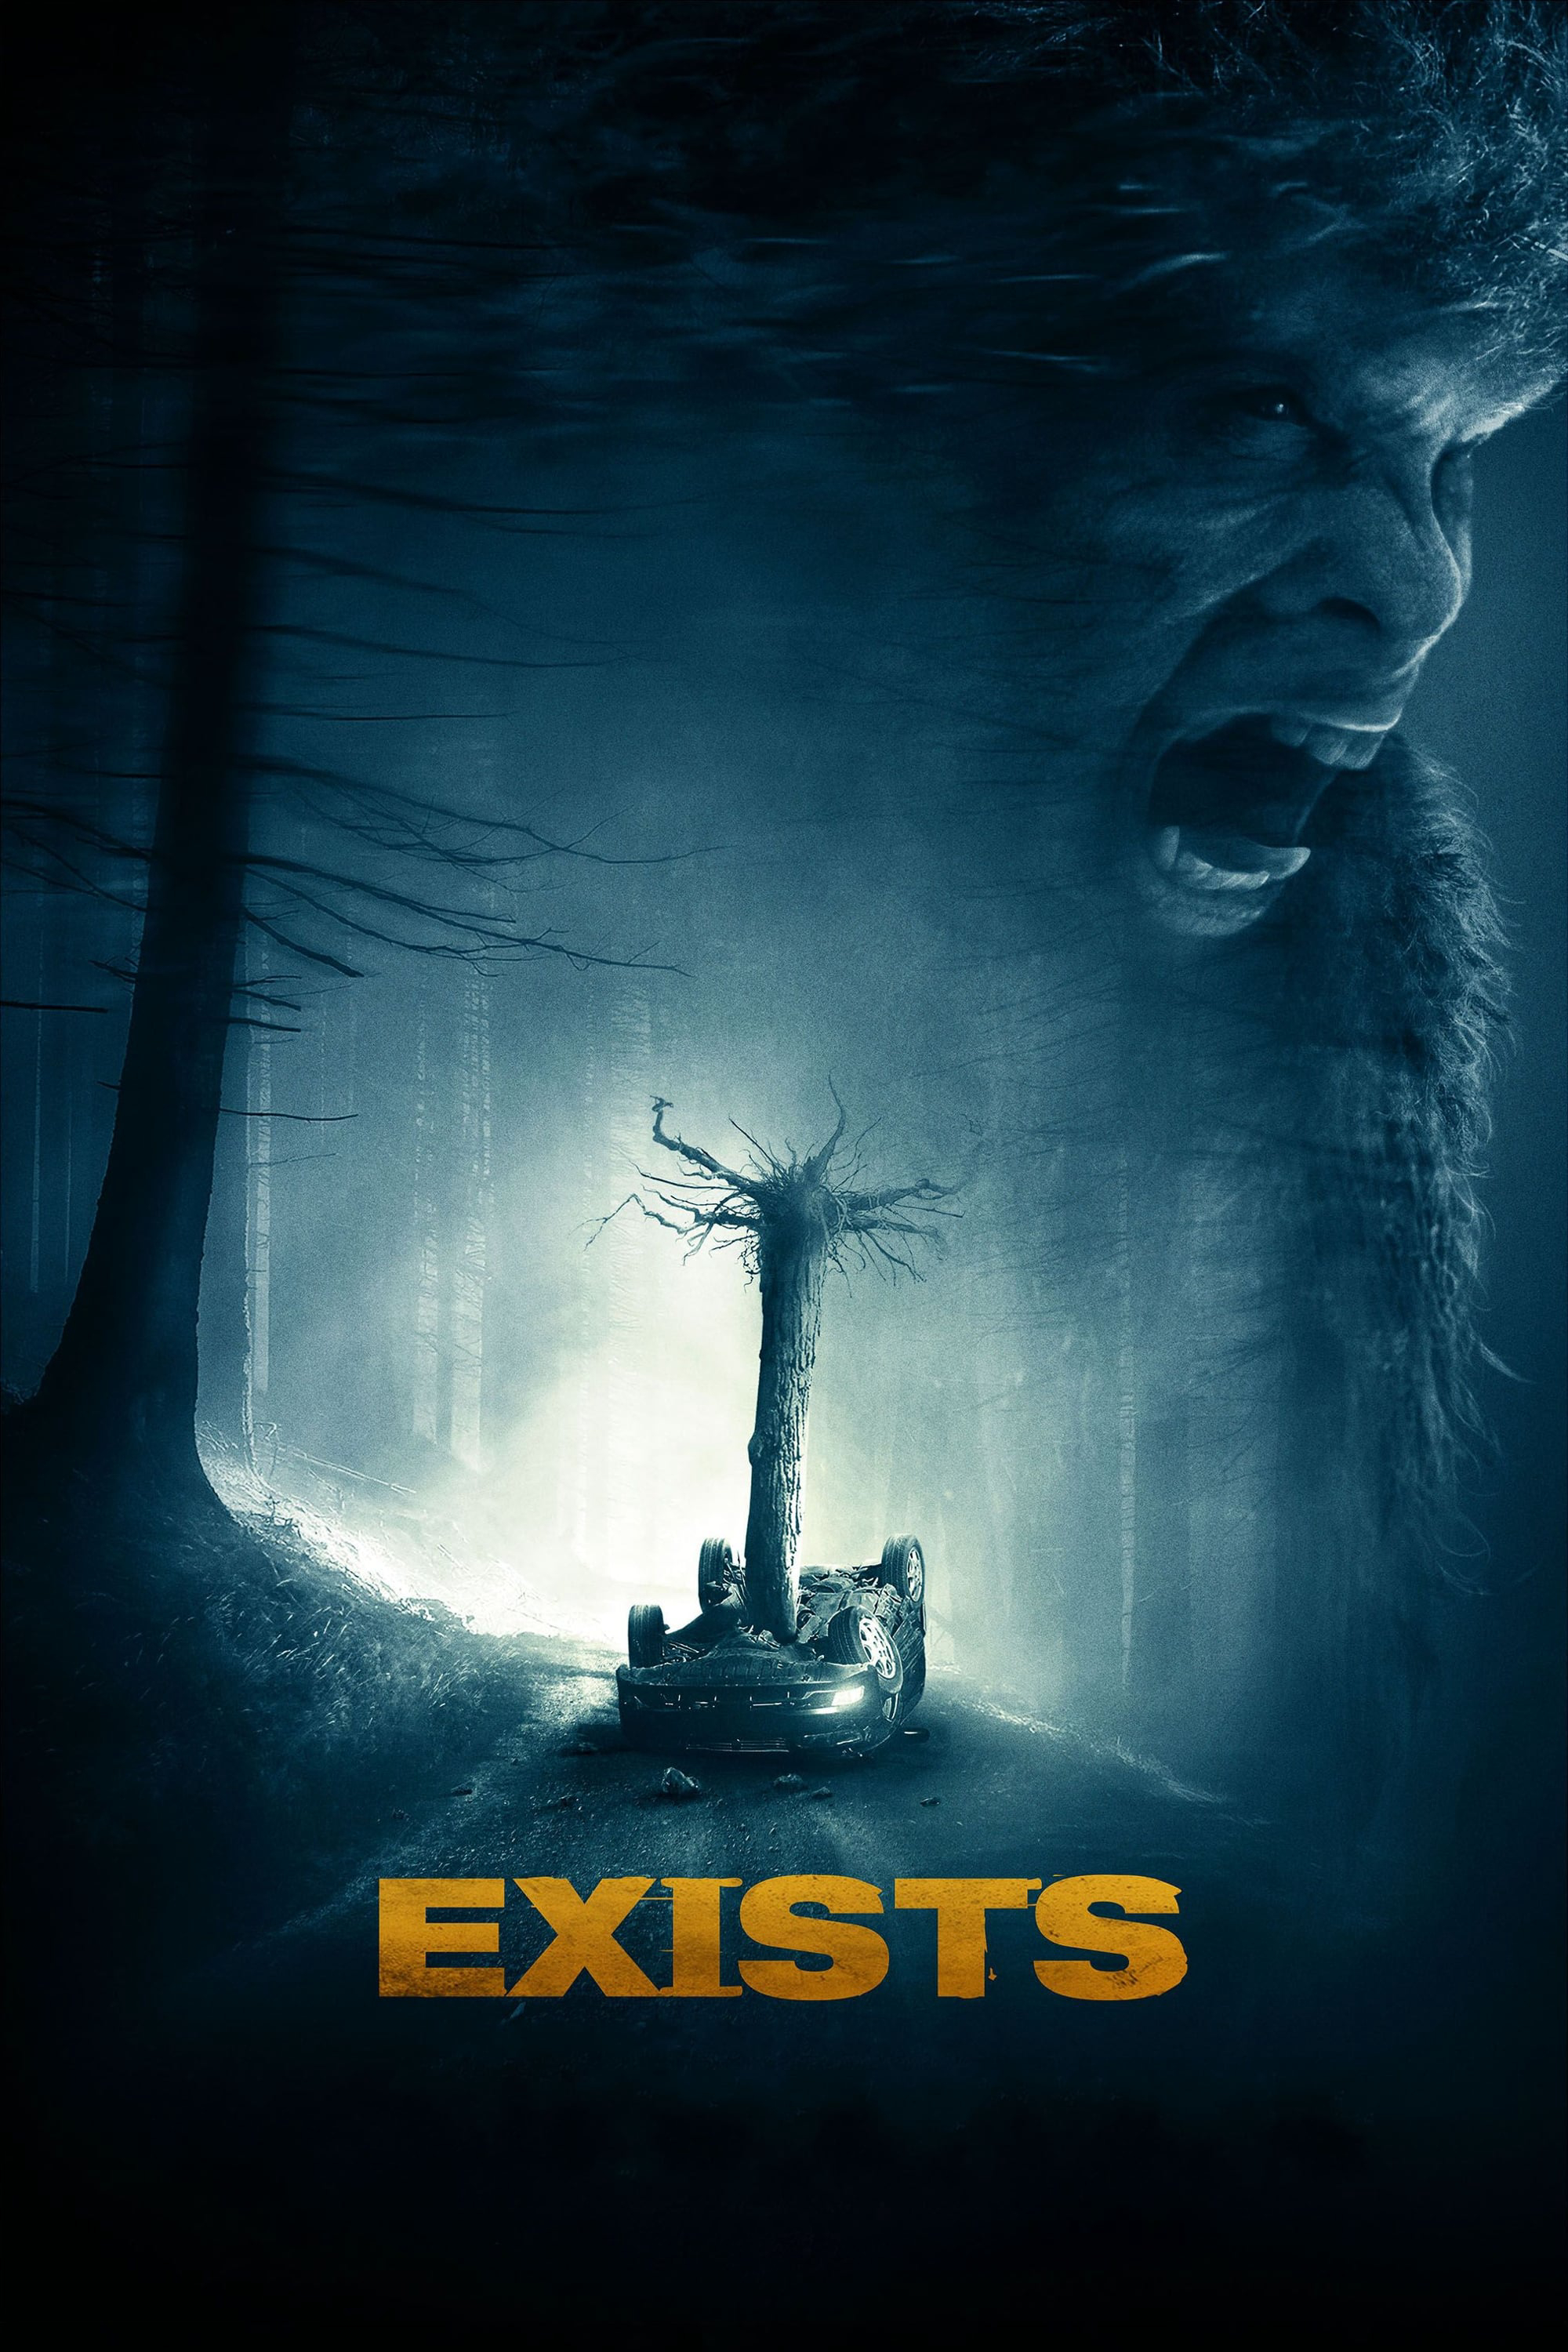 Exists (Exists) [2014]